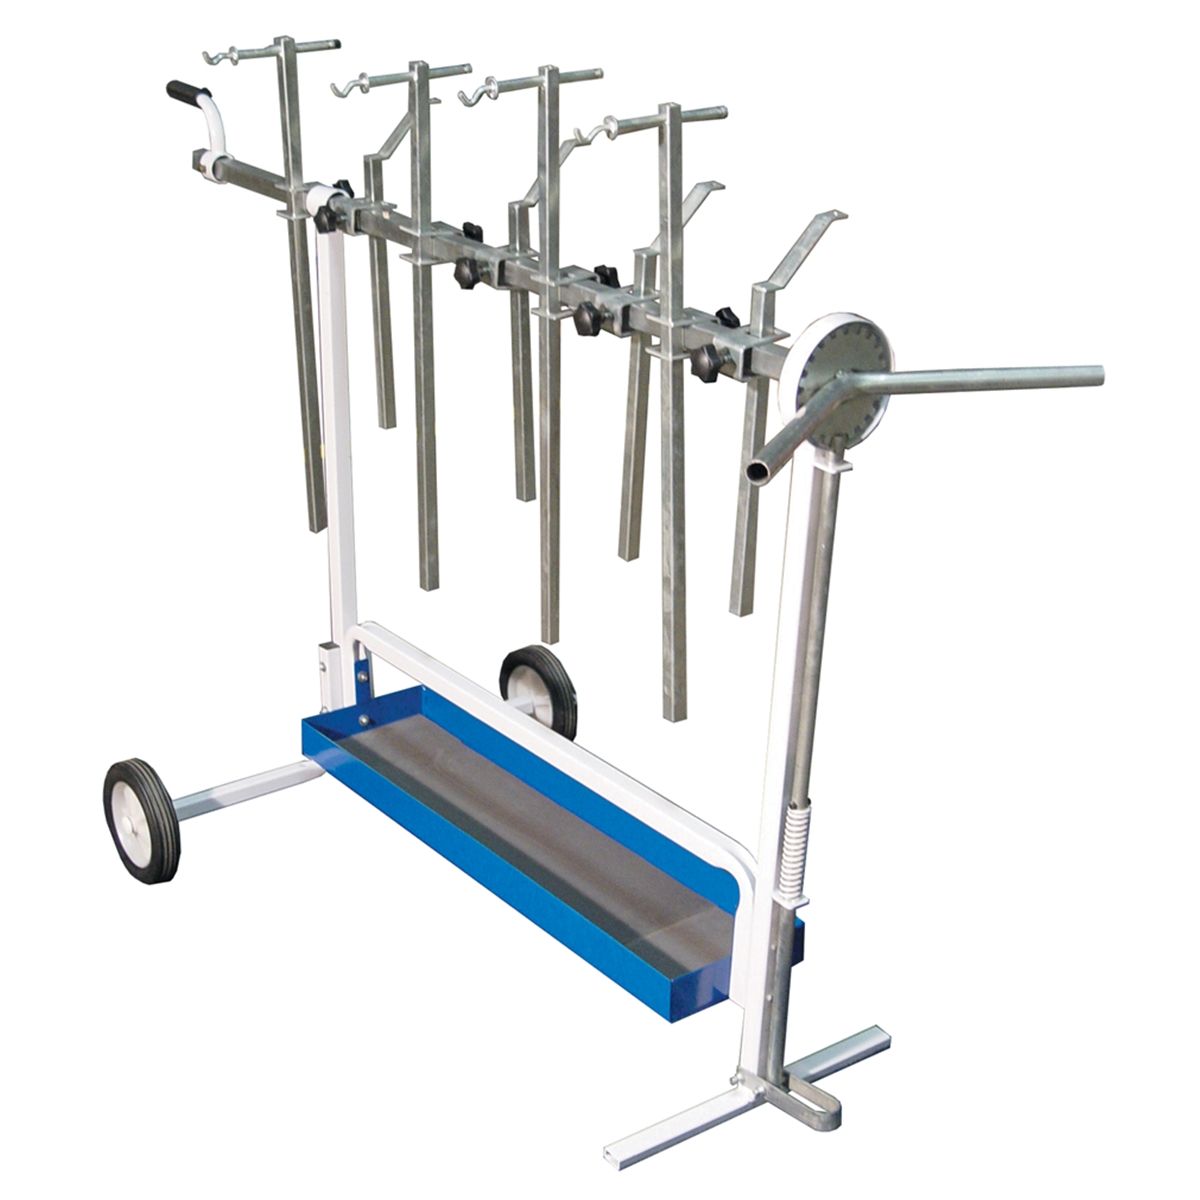 Astro Pneumatic 7300 Universal Rotating Super Work Stand for Pai